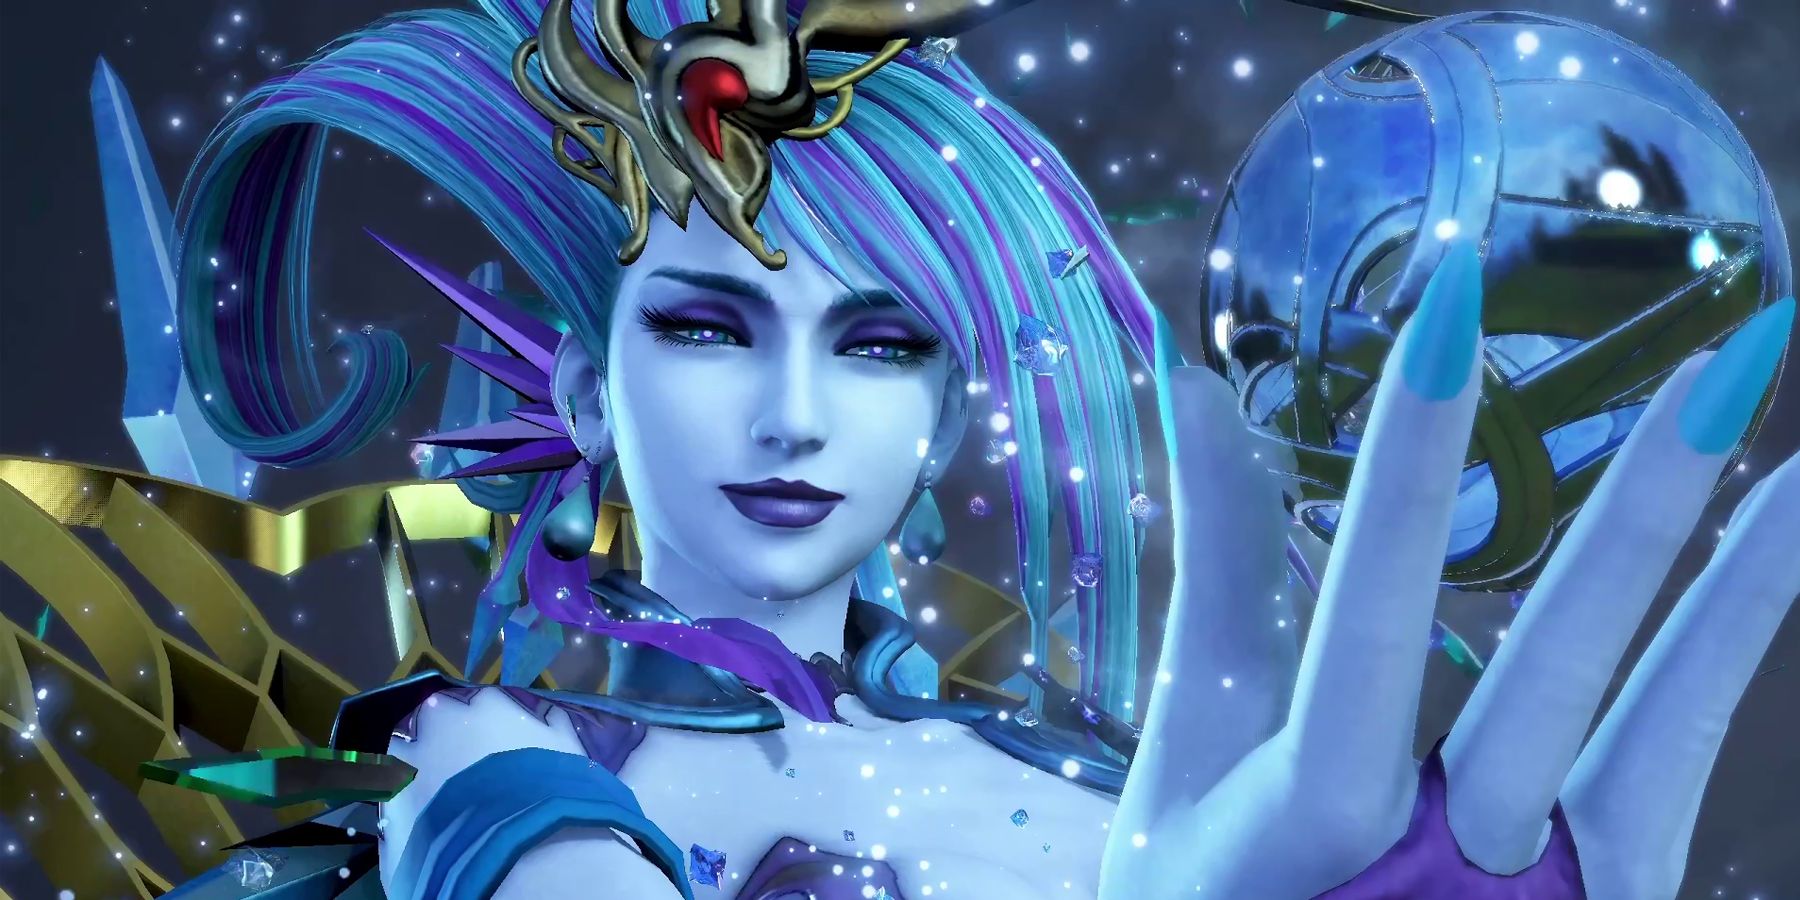 How Final Fantasy's Shiva Has Evolved From FF3 to FF15